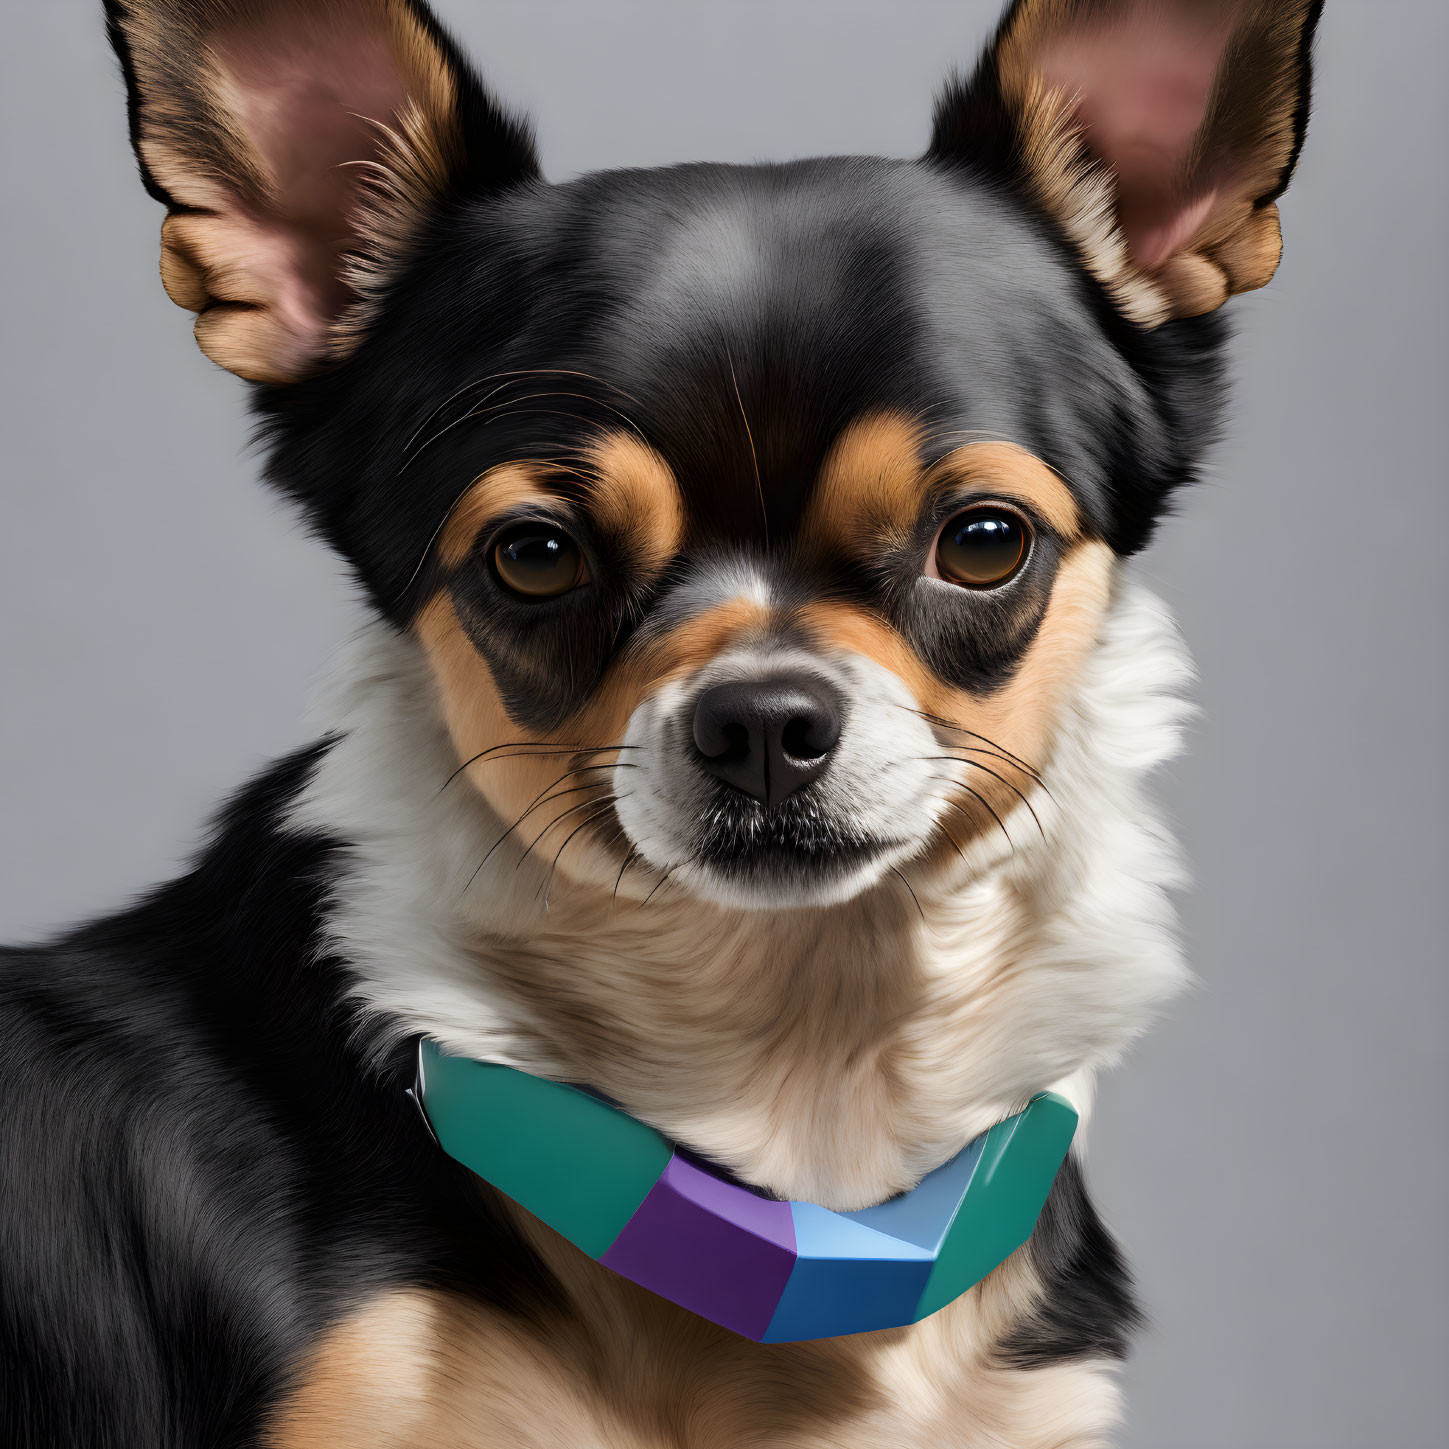 Close-Up Portrait of Chihuahua with Large Ears and Colorful Collar